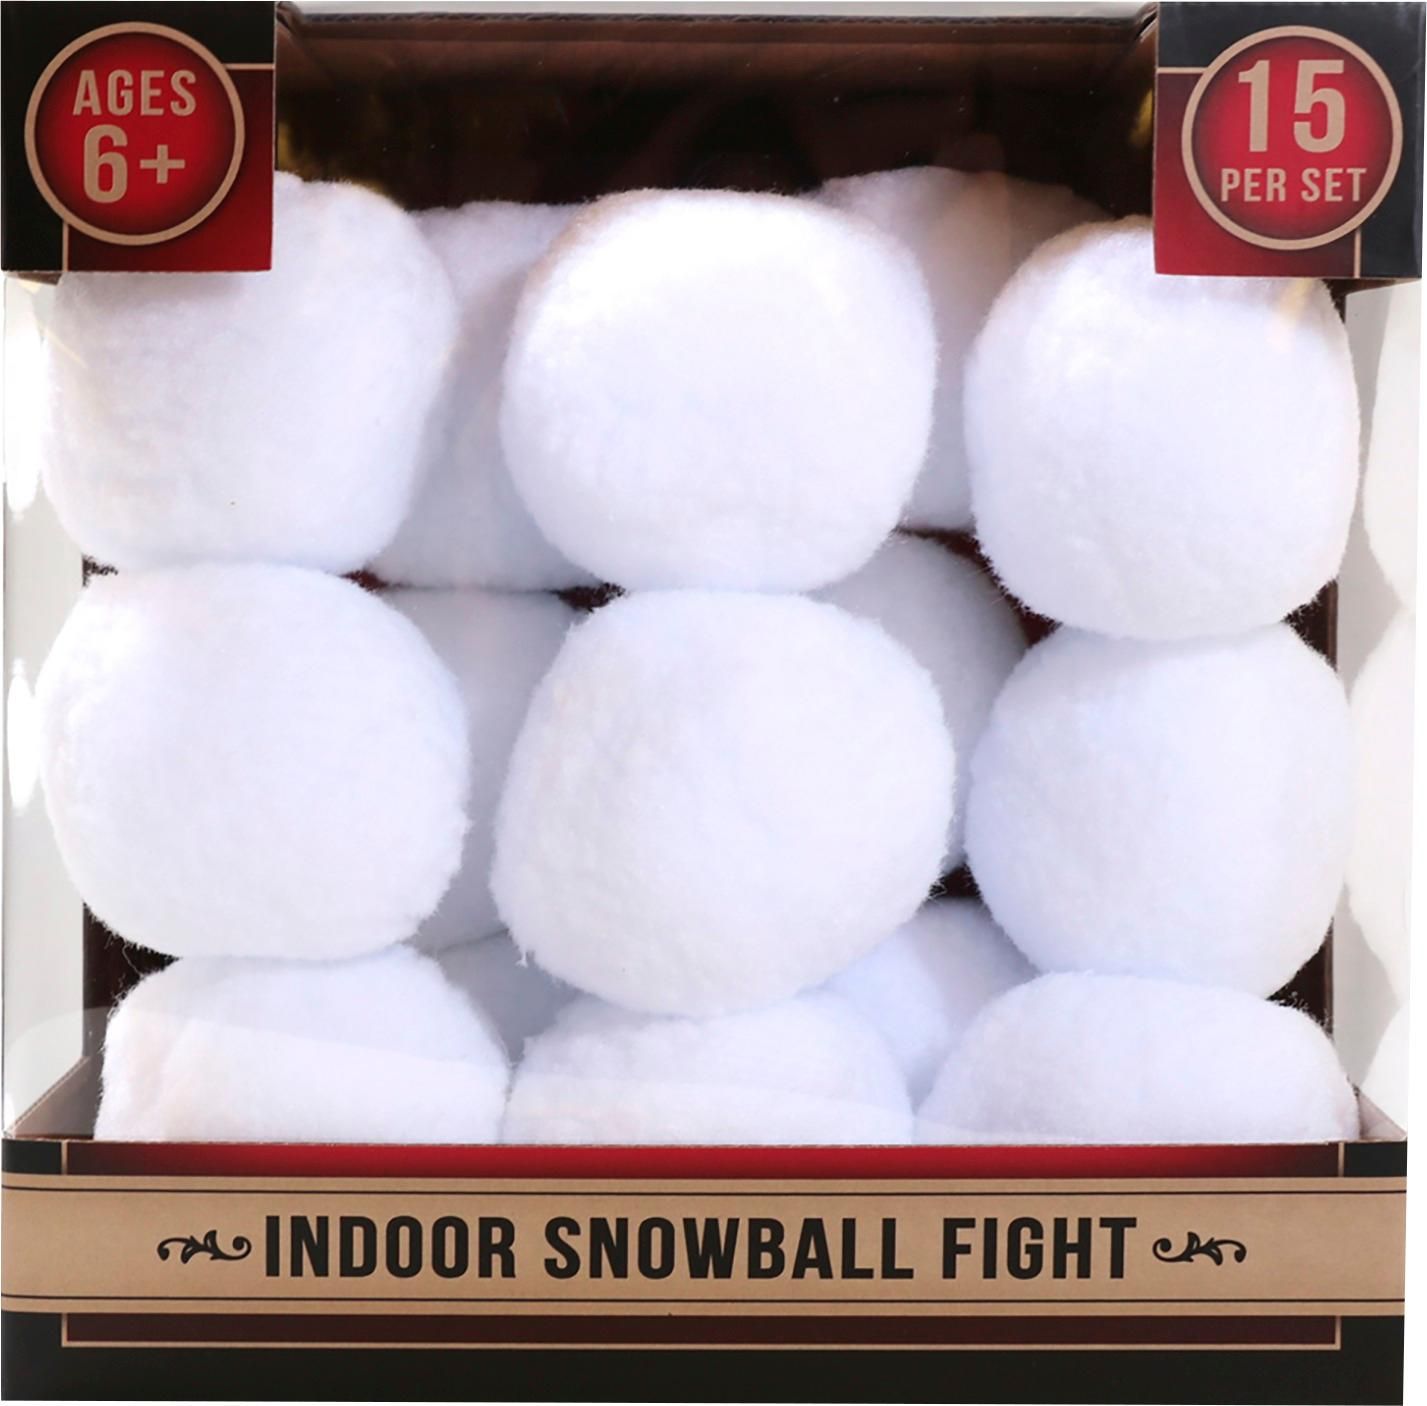 Package of fifteen white soft fabric balls, labeled "Indoor Snowball Fight."